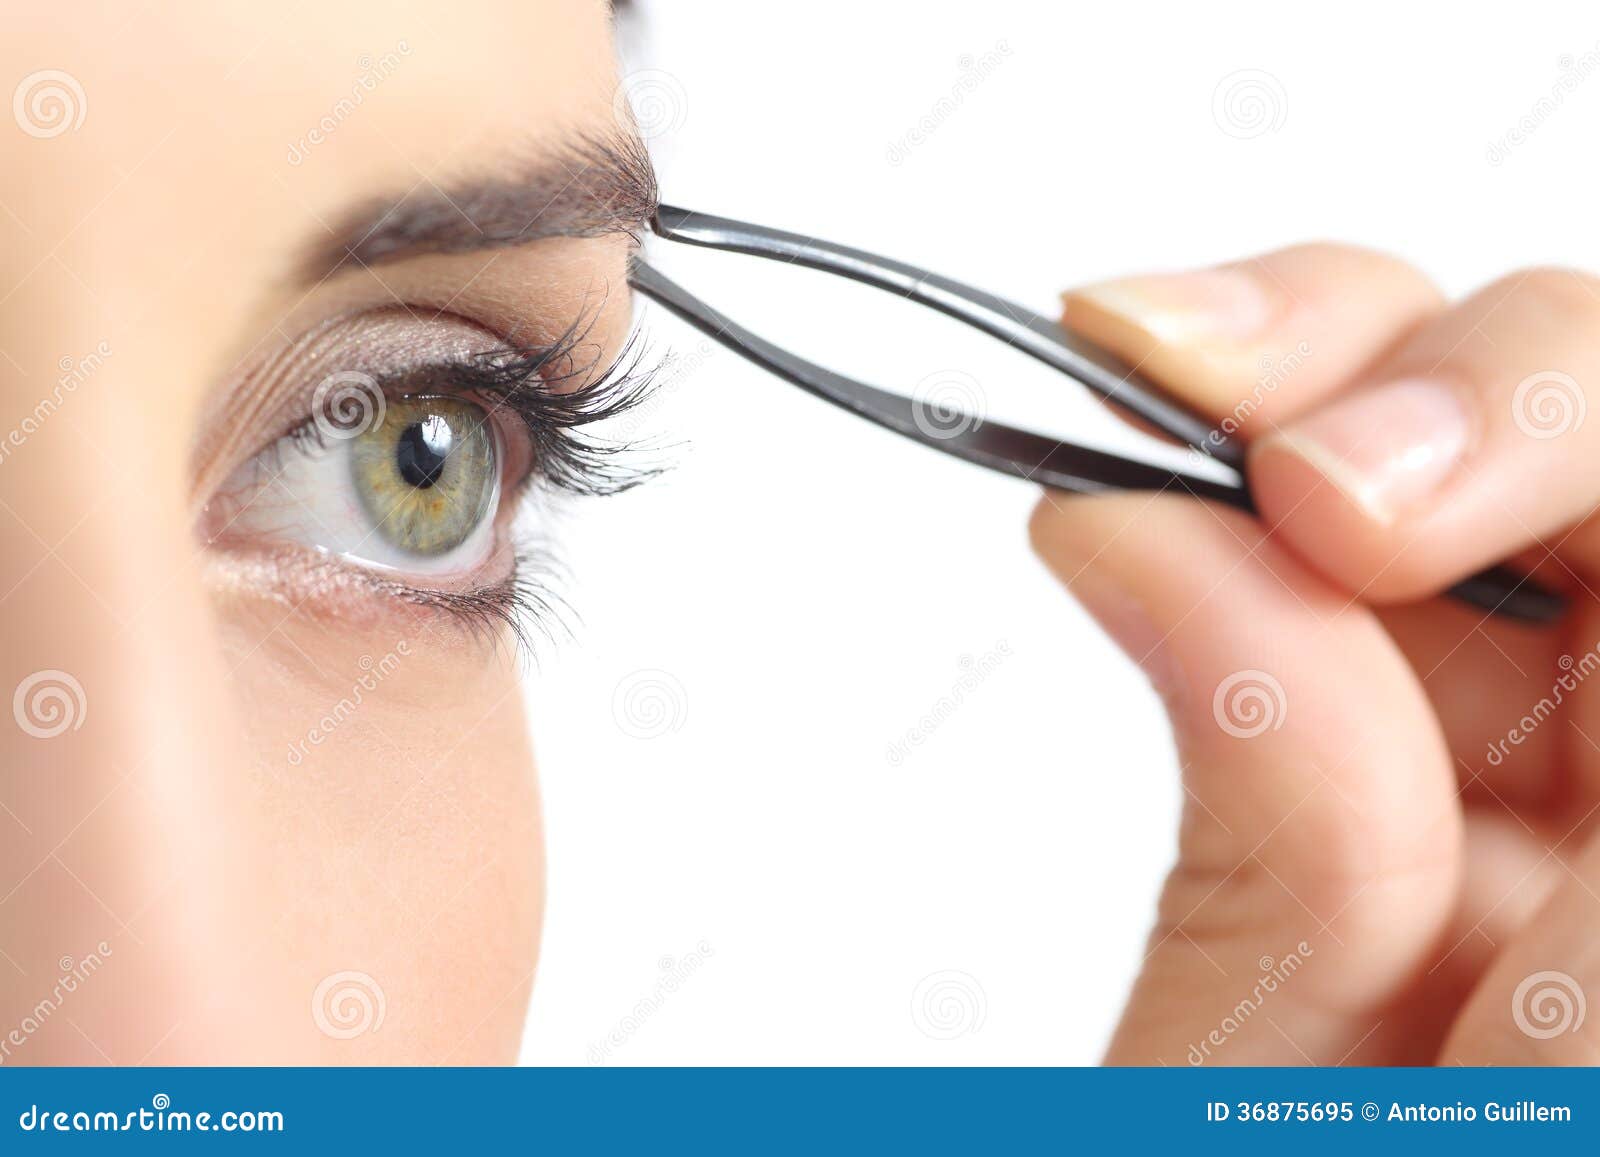 close up of a woman eye and a hand plucking eyebrows